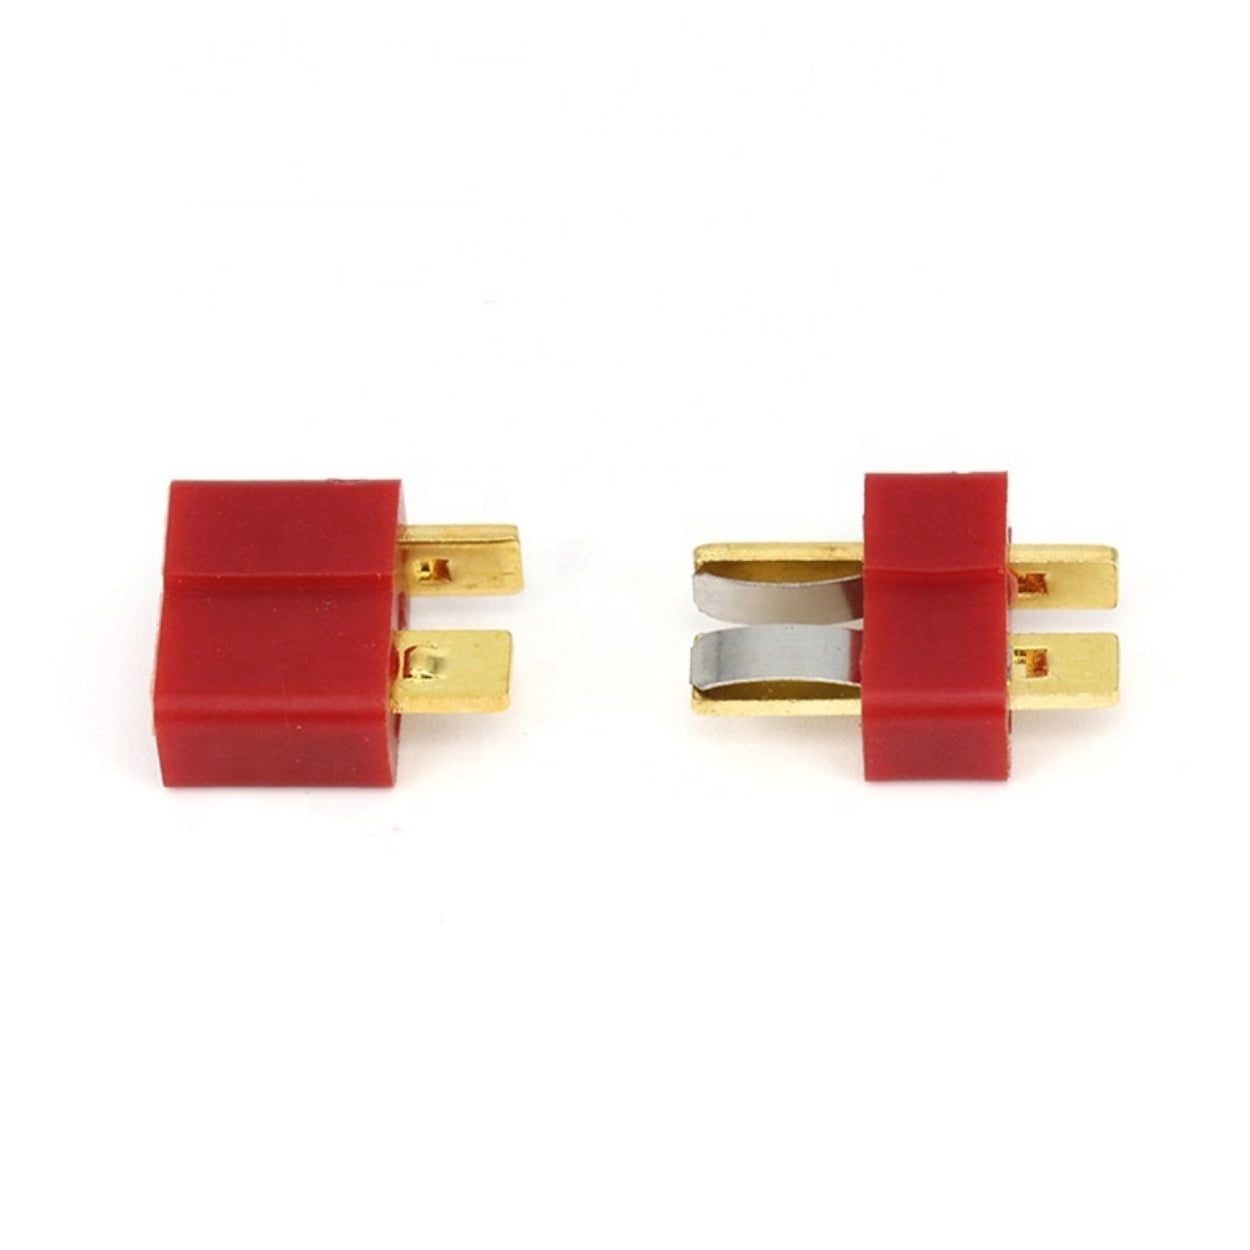 T Plug Deans Connector for LiPo Battery Male and Female 2 Pair